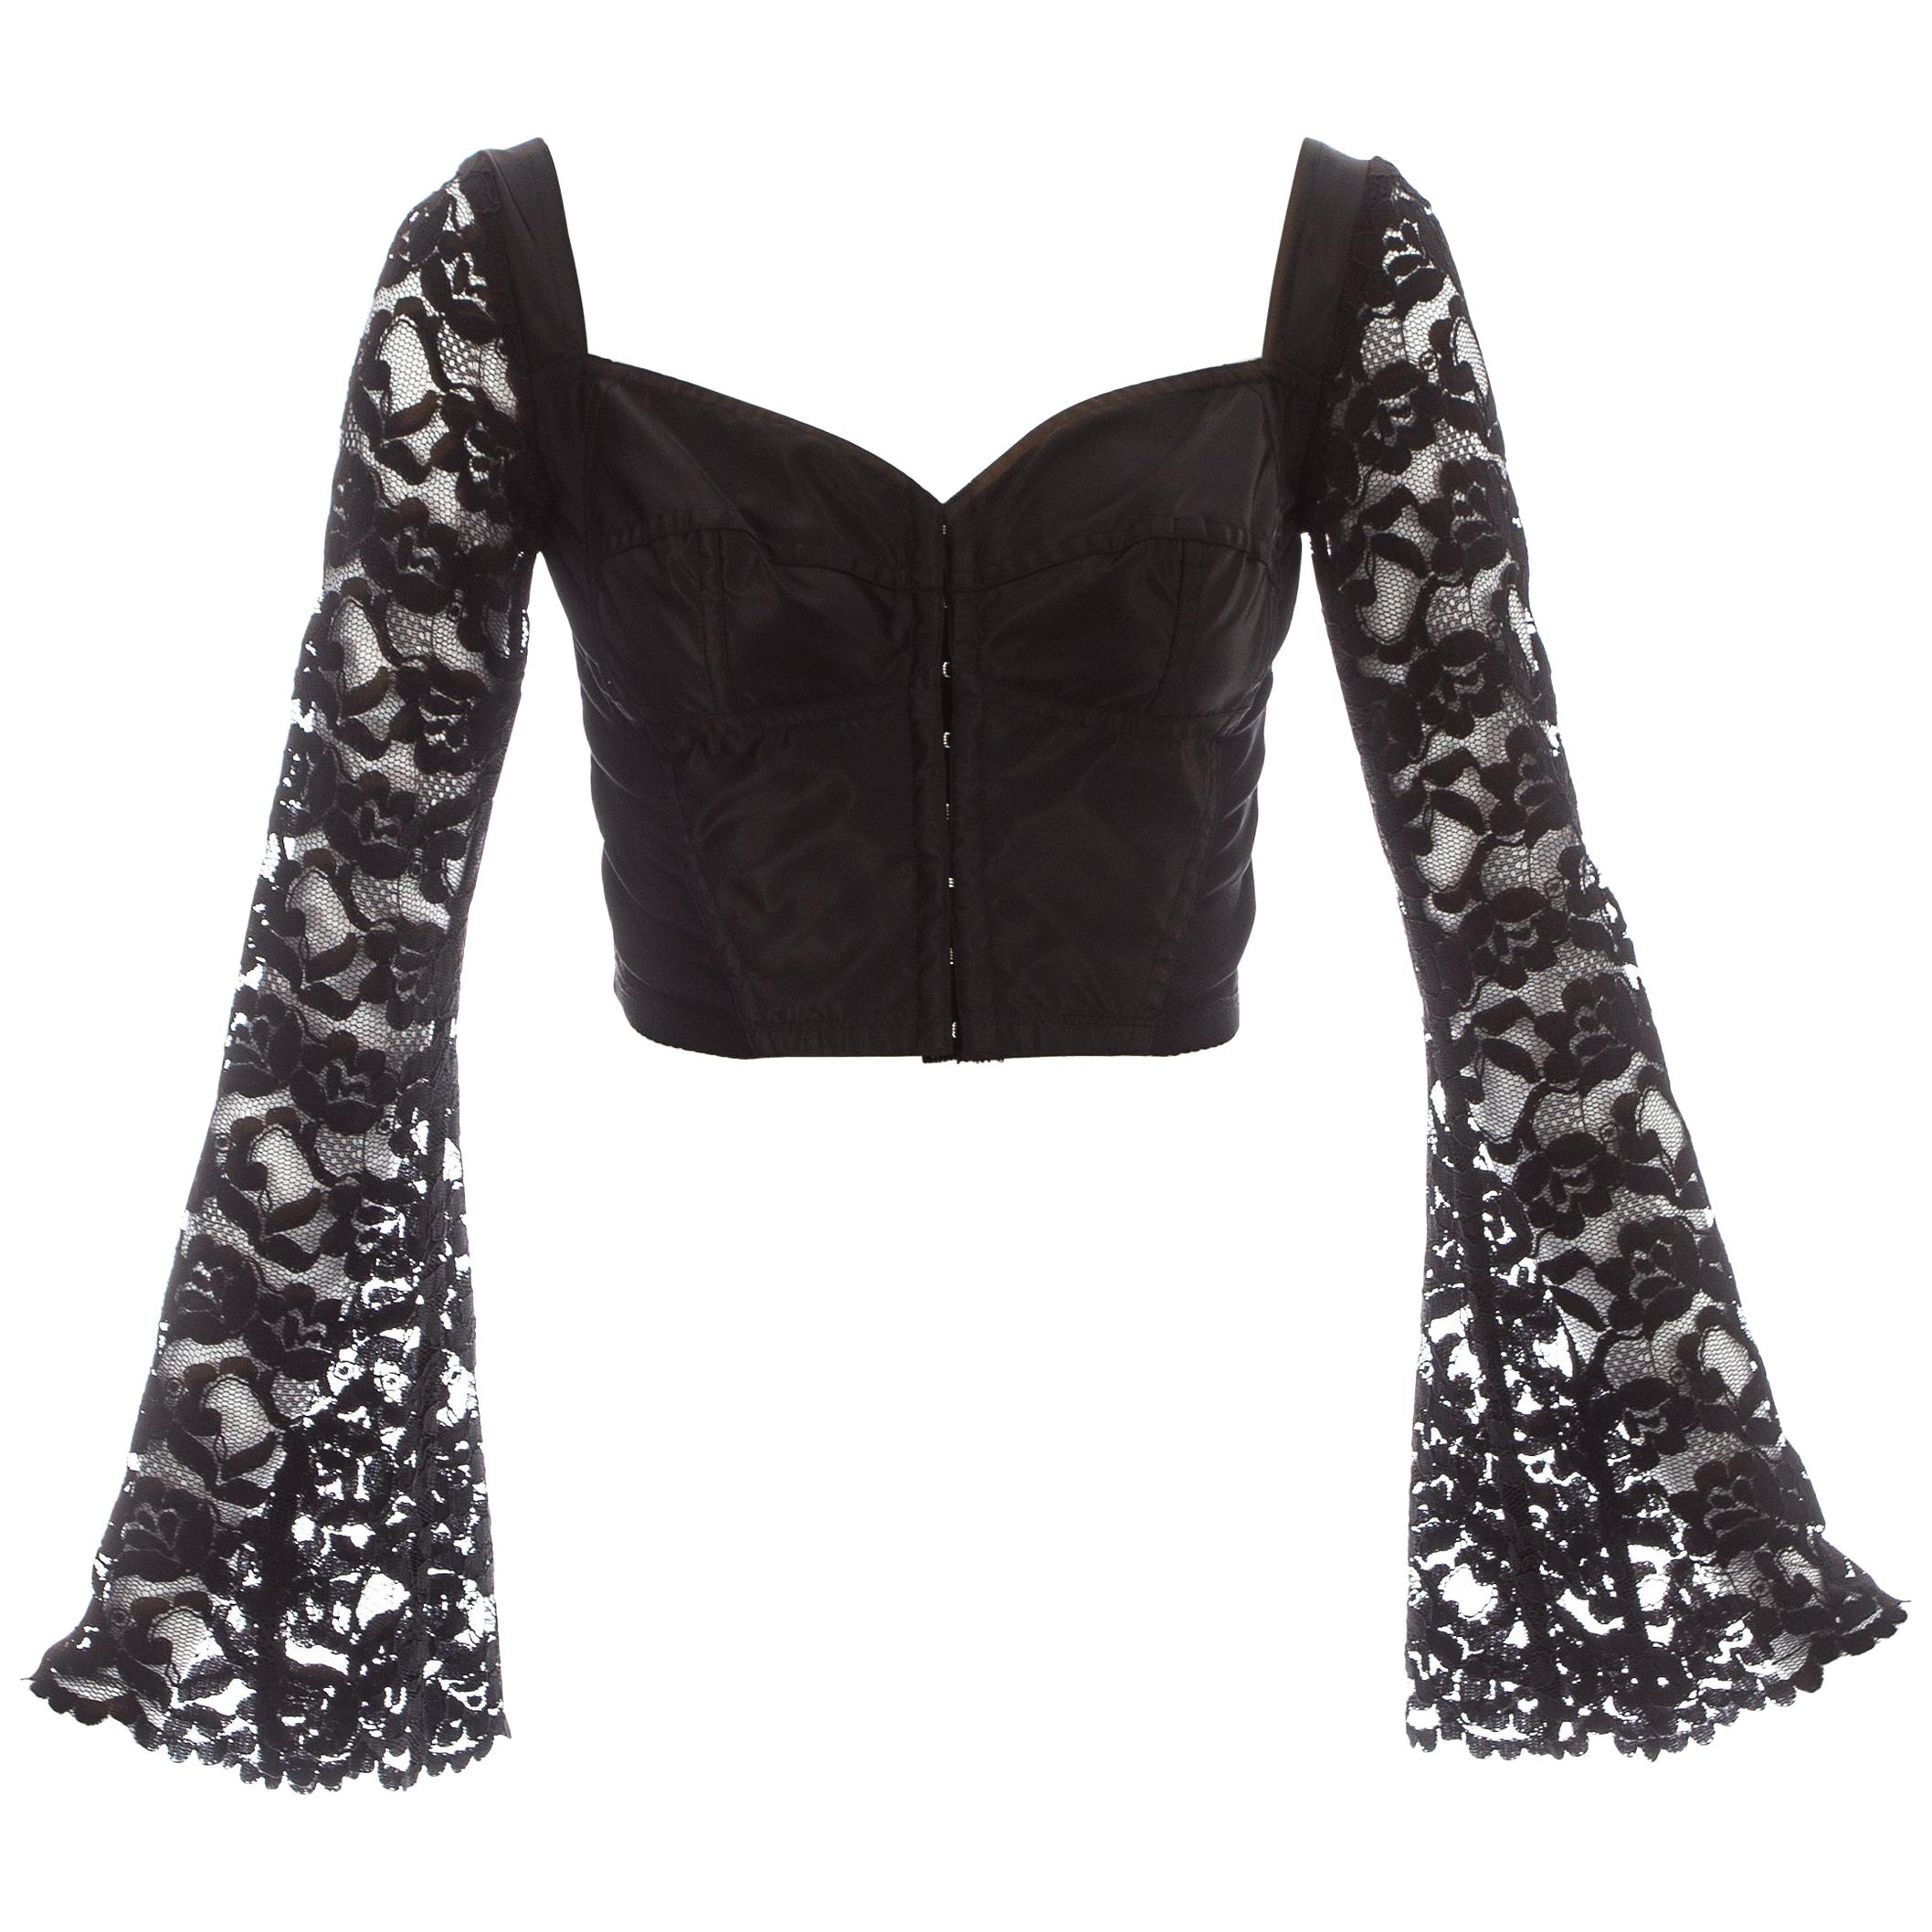 Dolce and Gabbana black lace and satin corset blouse, c. 1993 at 1stDibs